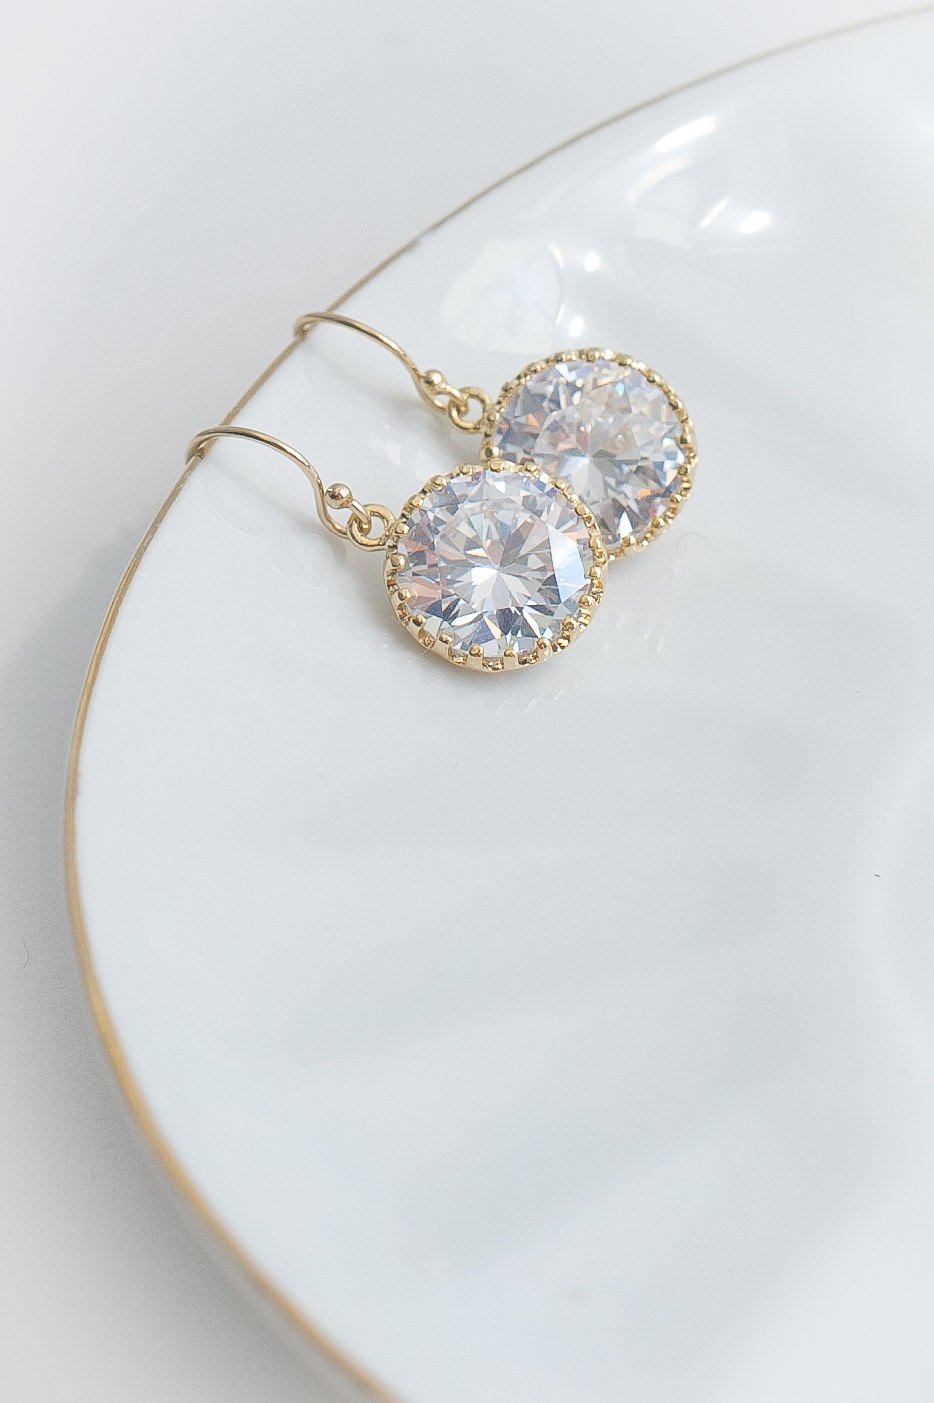 Gold and Swarovski Round Earrings - Corinne an Affordable Women's Clothing Boutique in the US USA